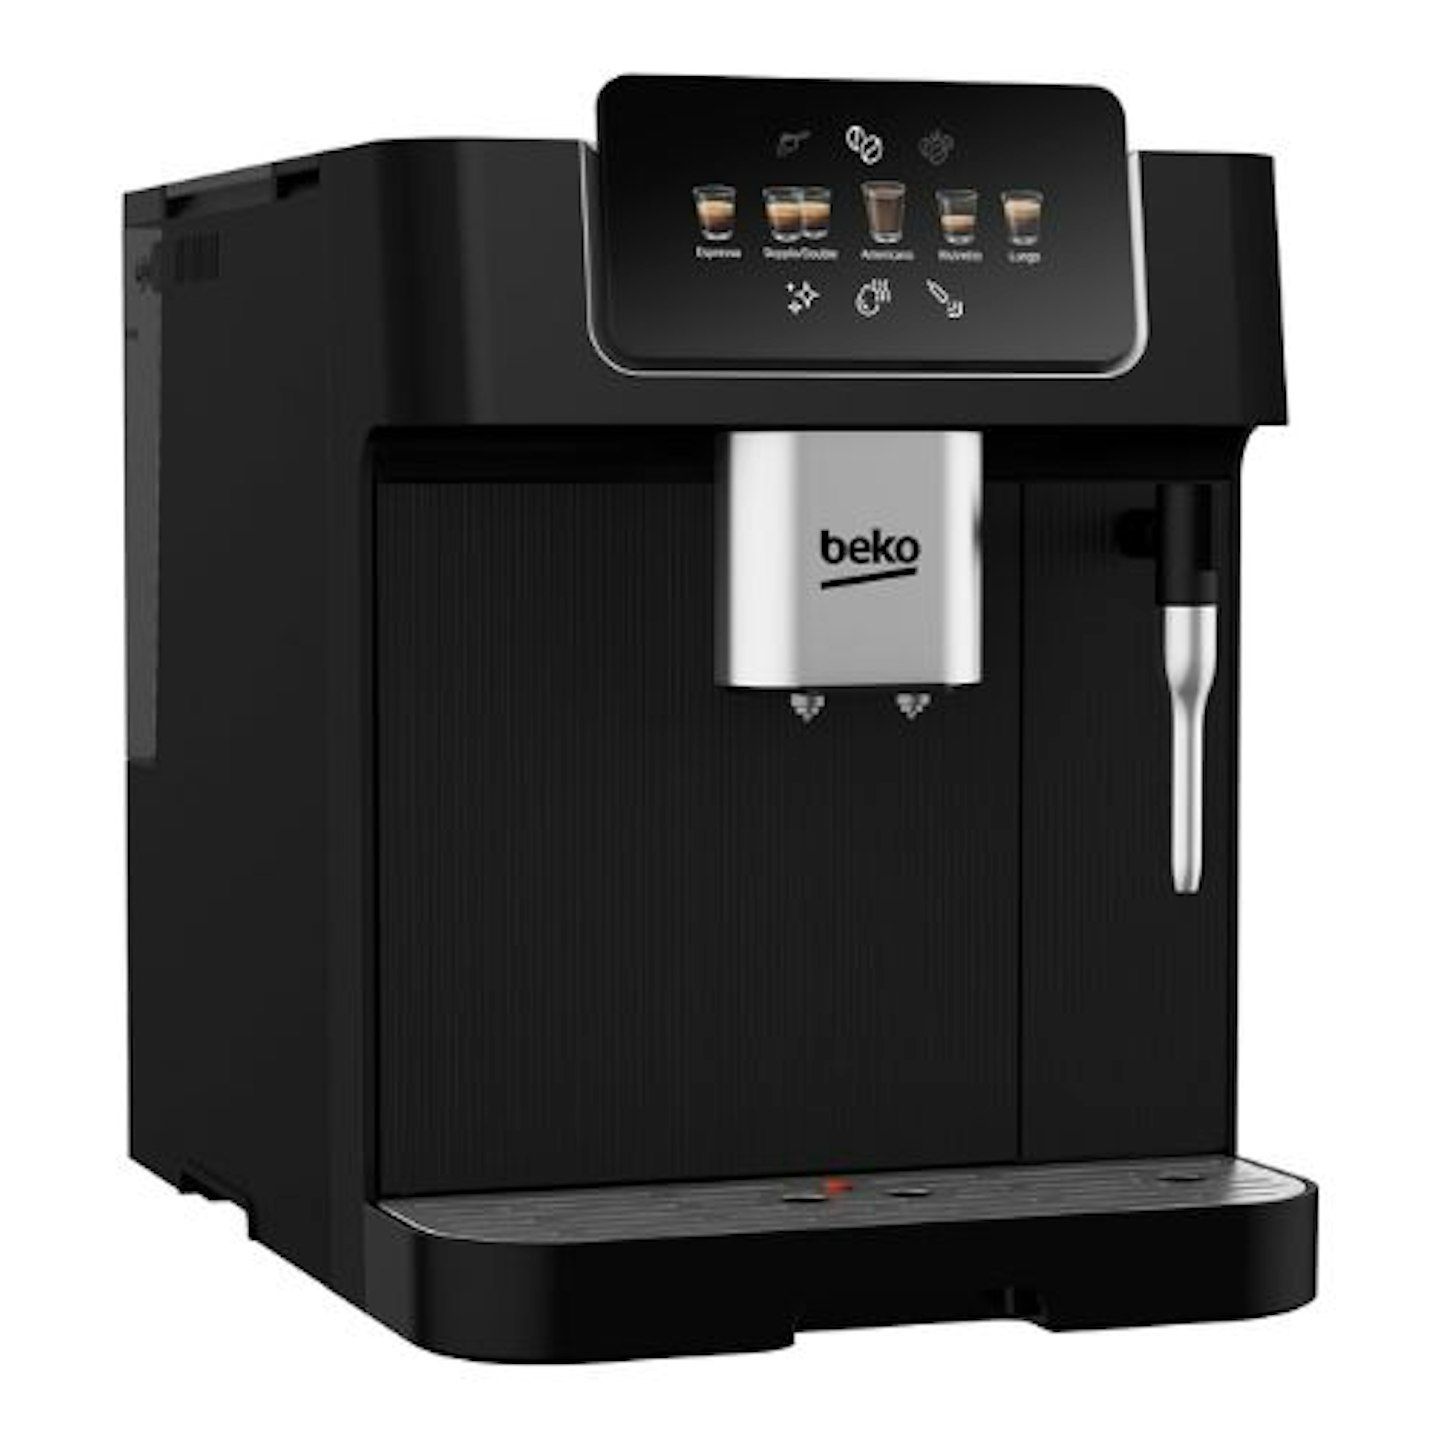 Beko CaffeExperto Bean to Cup Coffee Espresso Machine CEG7302B | Black | Colour Touch Screen Display | 2L Capacity |19 Bar Pressure | 2 Coffee Nozzles & Milk Frother